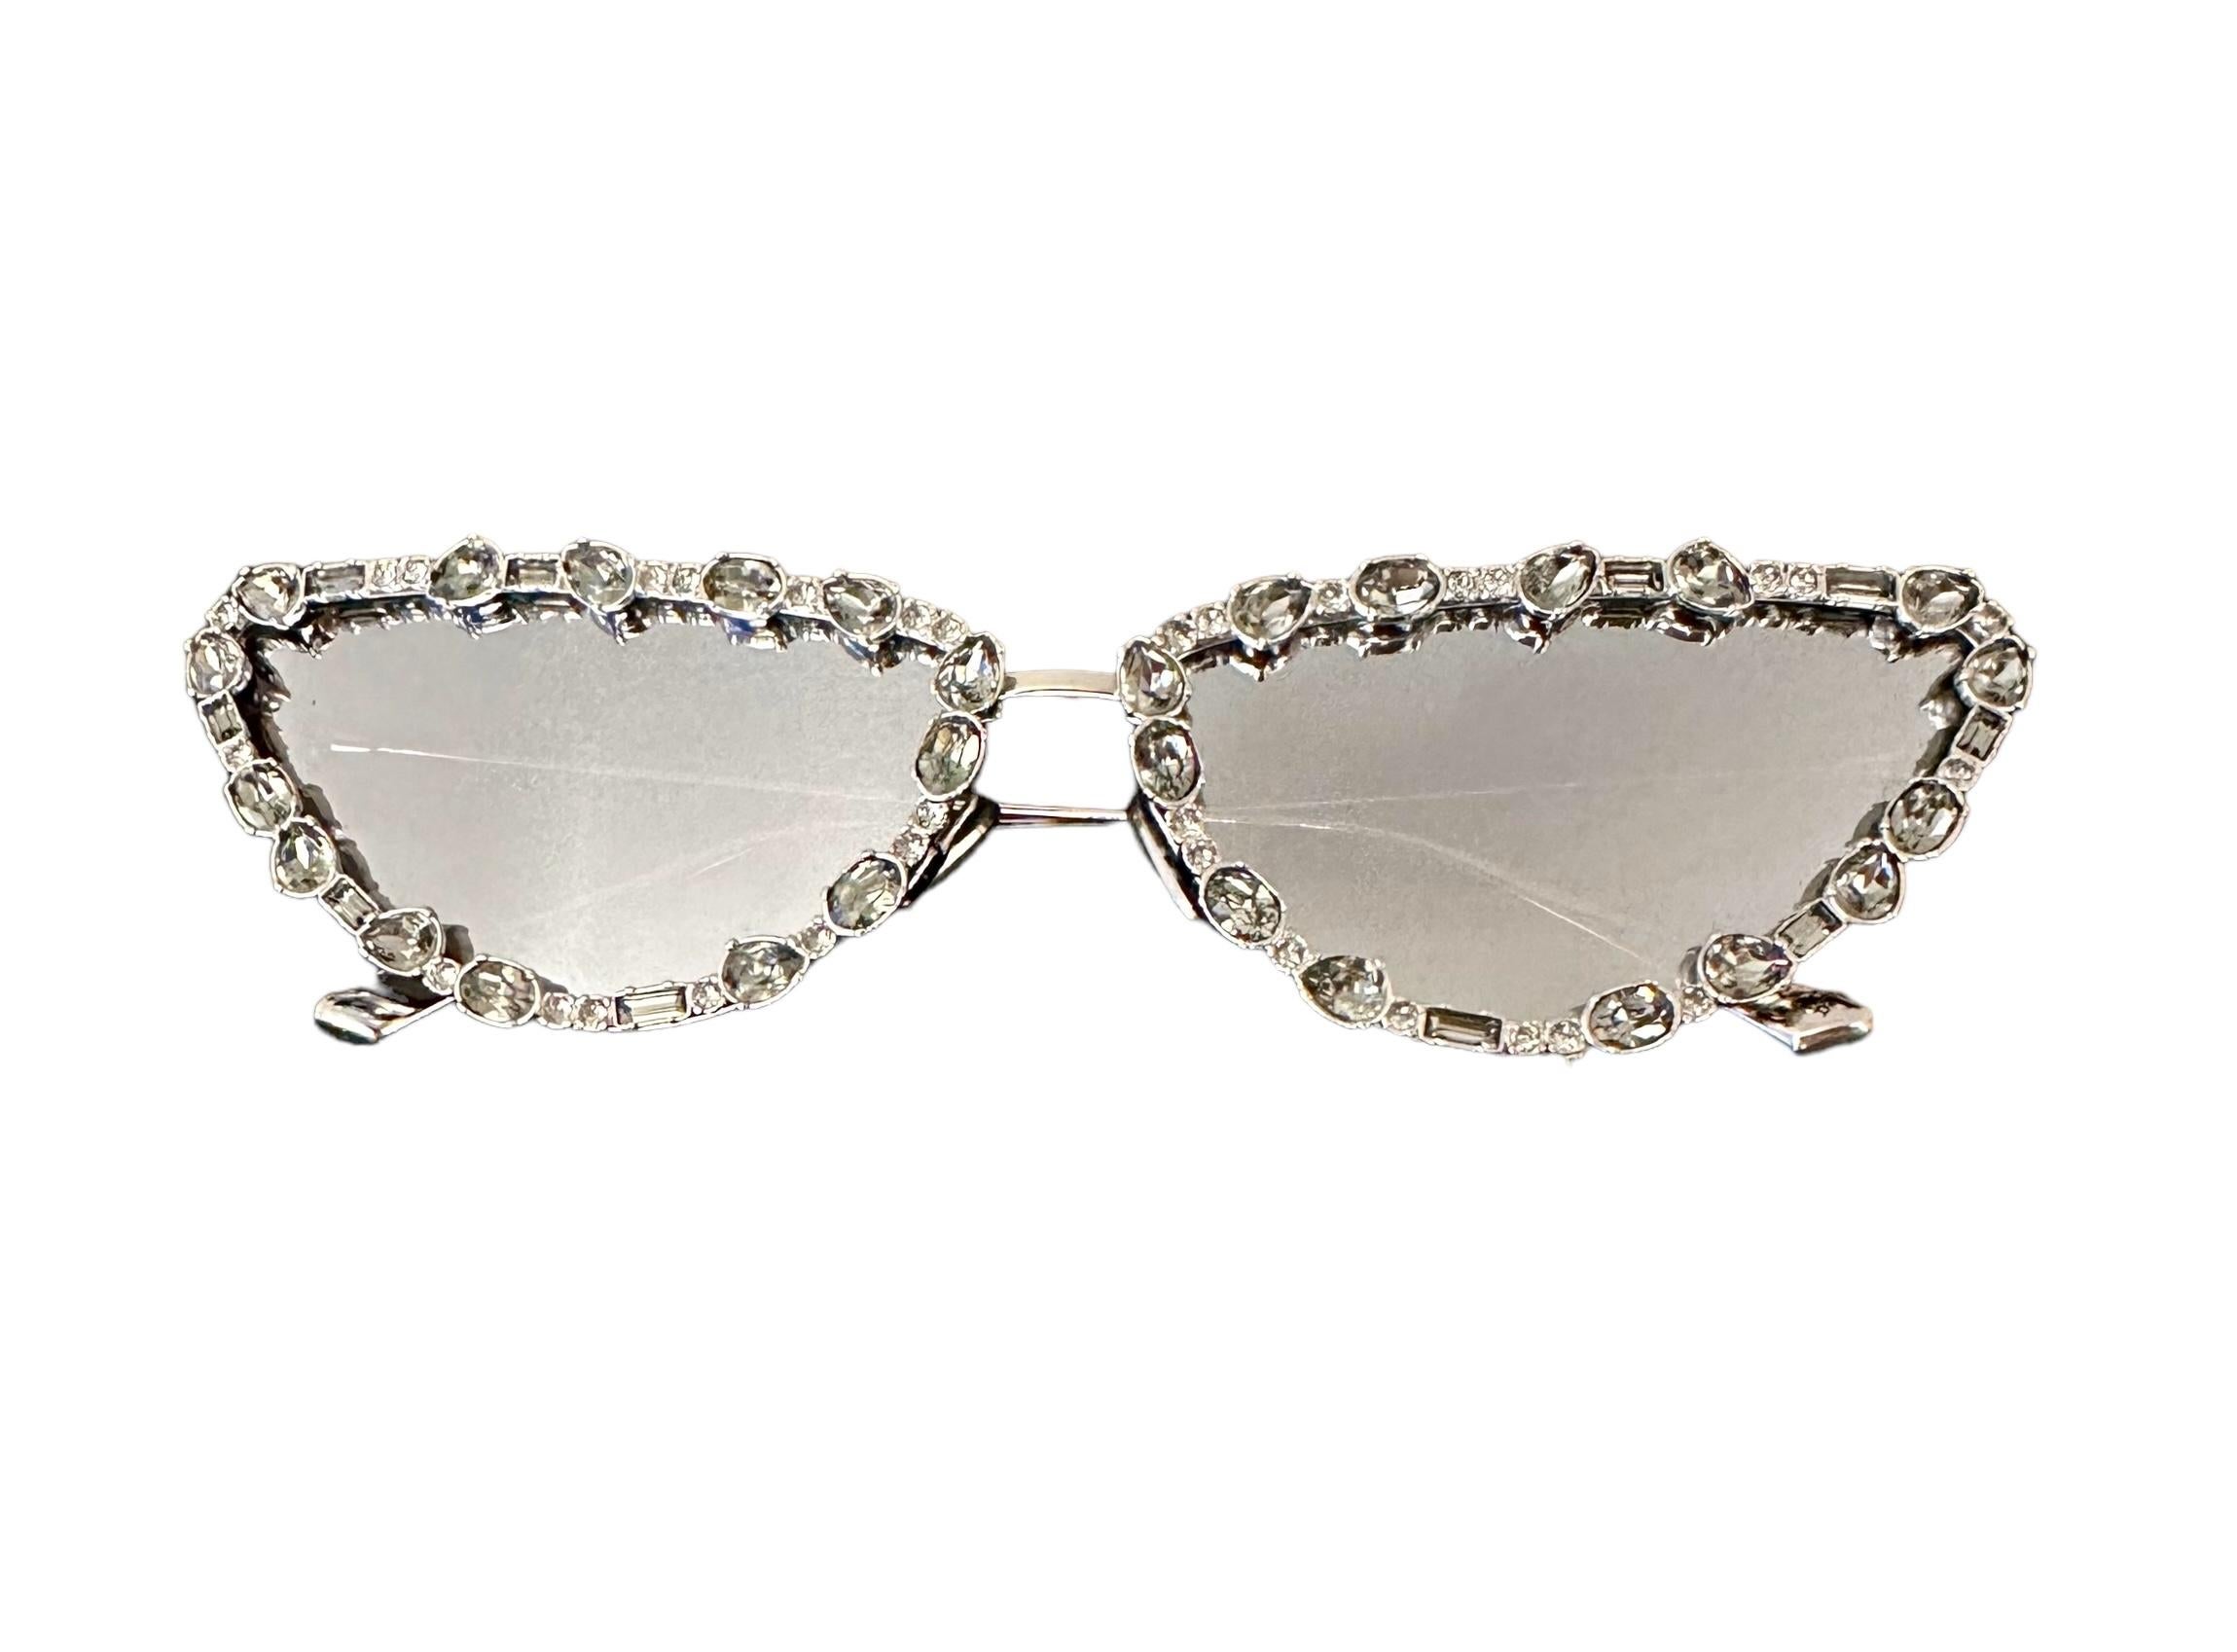 Best seller of the year 2022, this new pair of Miss Dior B1U is a must for this summer !
Beautifully shaped as a cat-eye style, the frames are embellished with Swarovski crystals.
Retail: €990

Year: 2022
Collection: Miss Dior
Name: Miss Dior